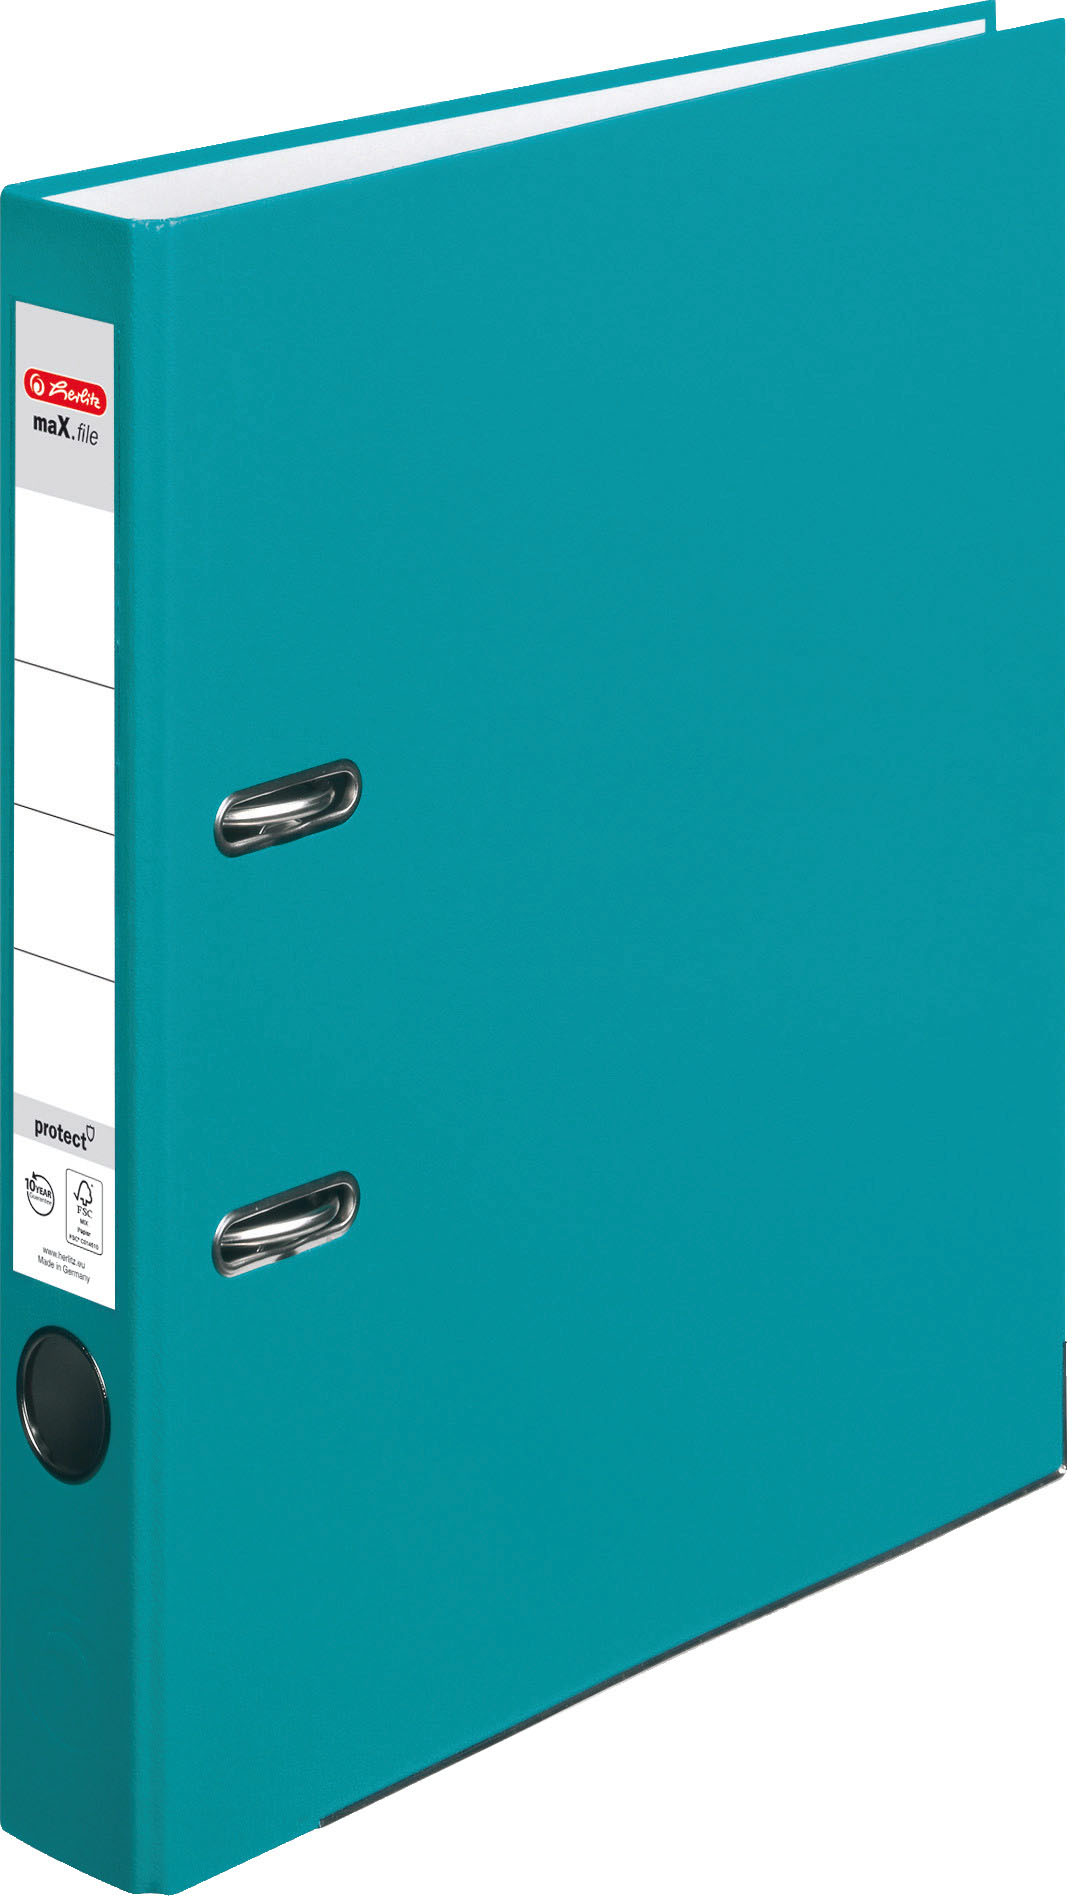 HERLITZ Classeur maX.file 5cm 50015955 turquoise A4 turquoise A4